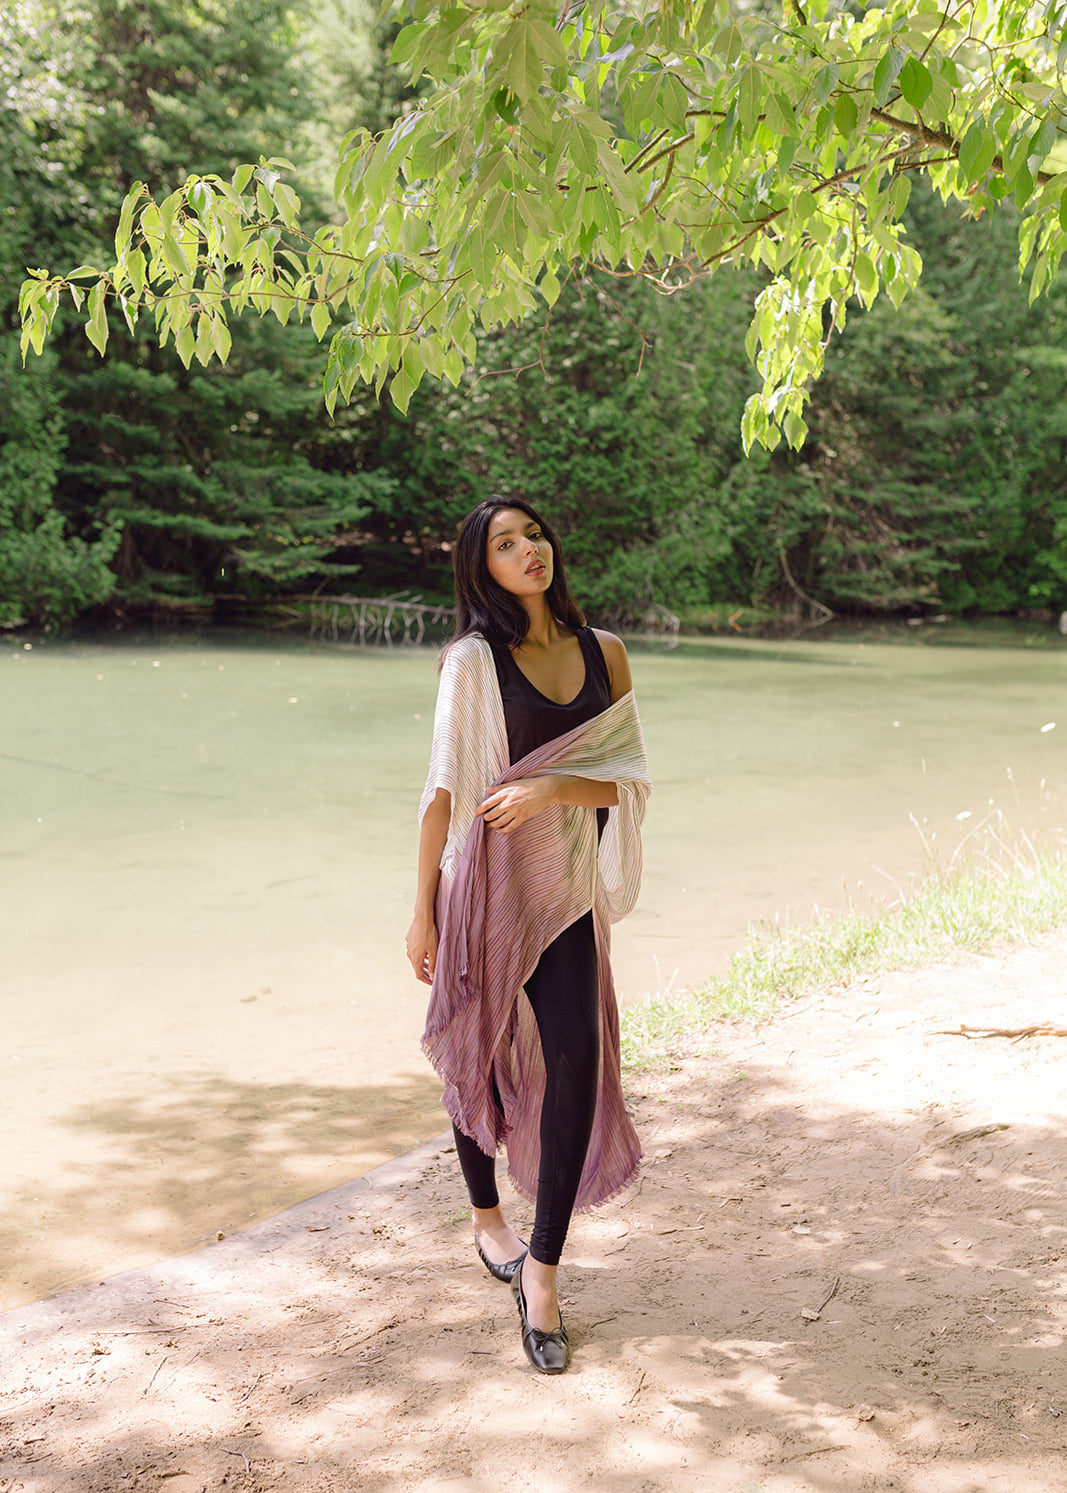 Women's beach coverup, light purple ombre kimono dress. Maternity clothing. Pictured with black top and leggings.